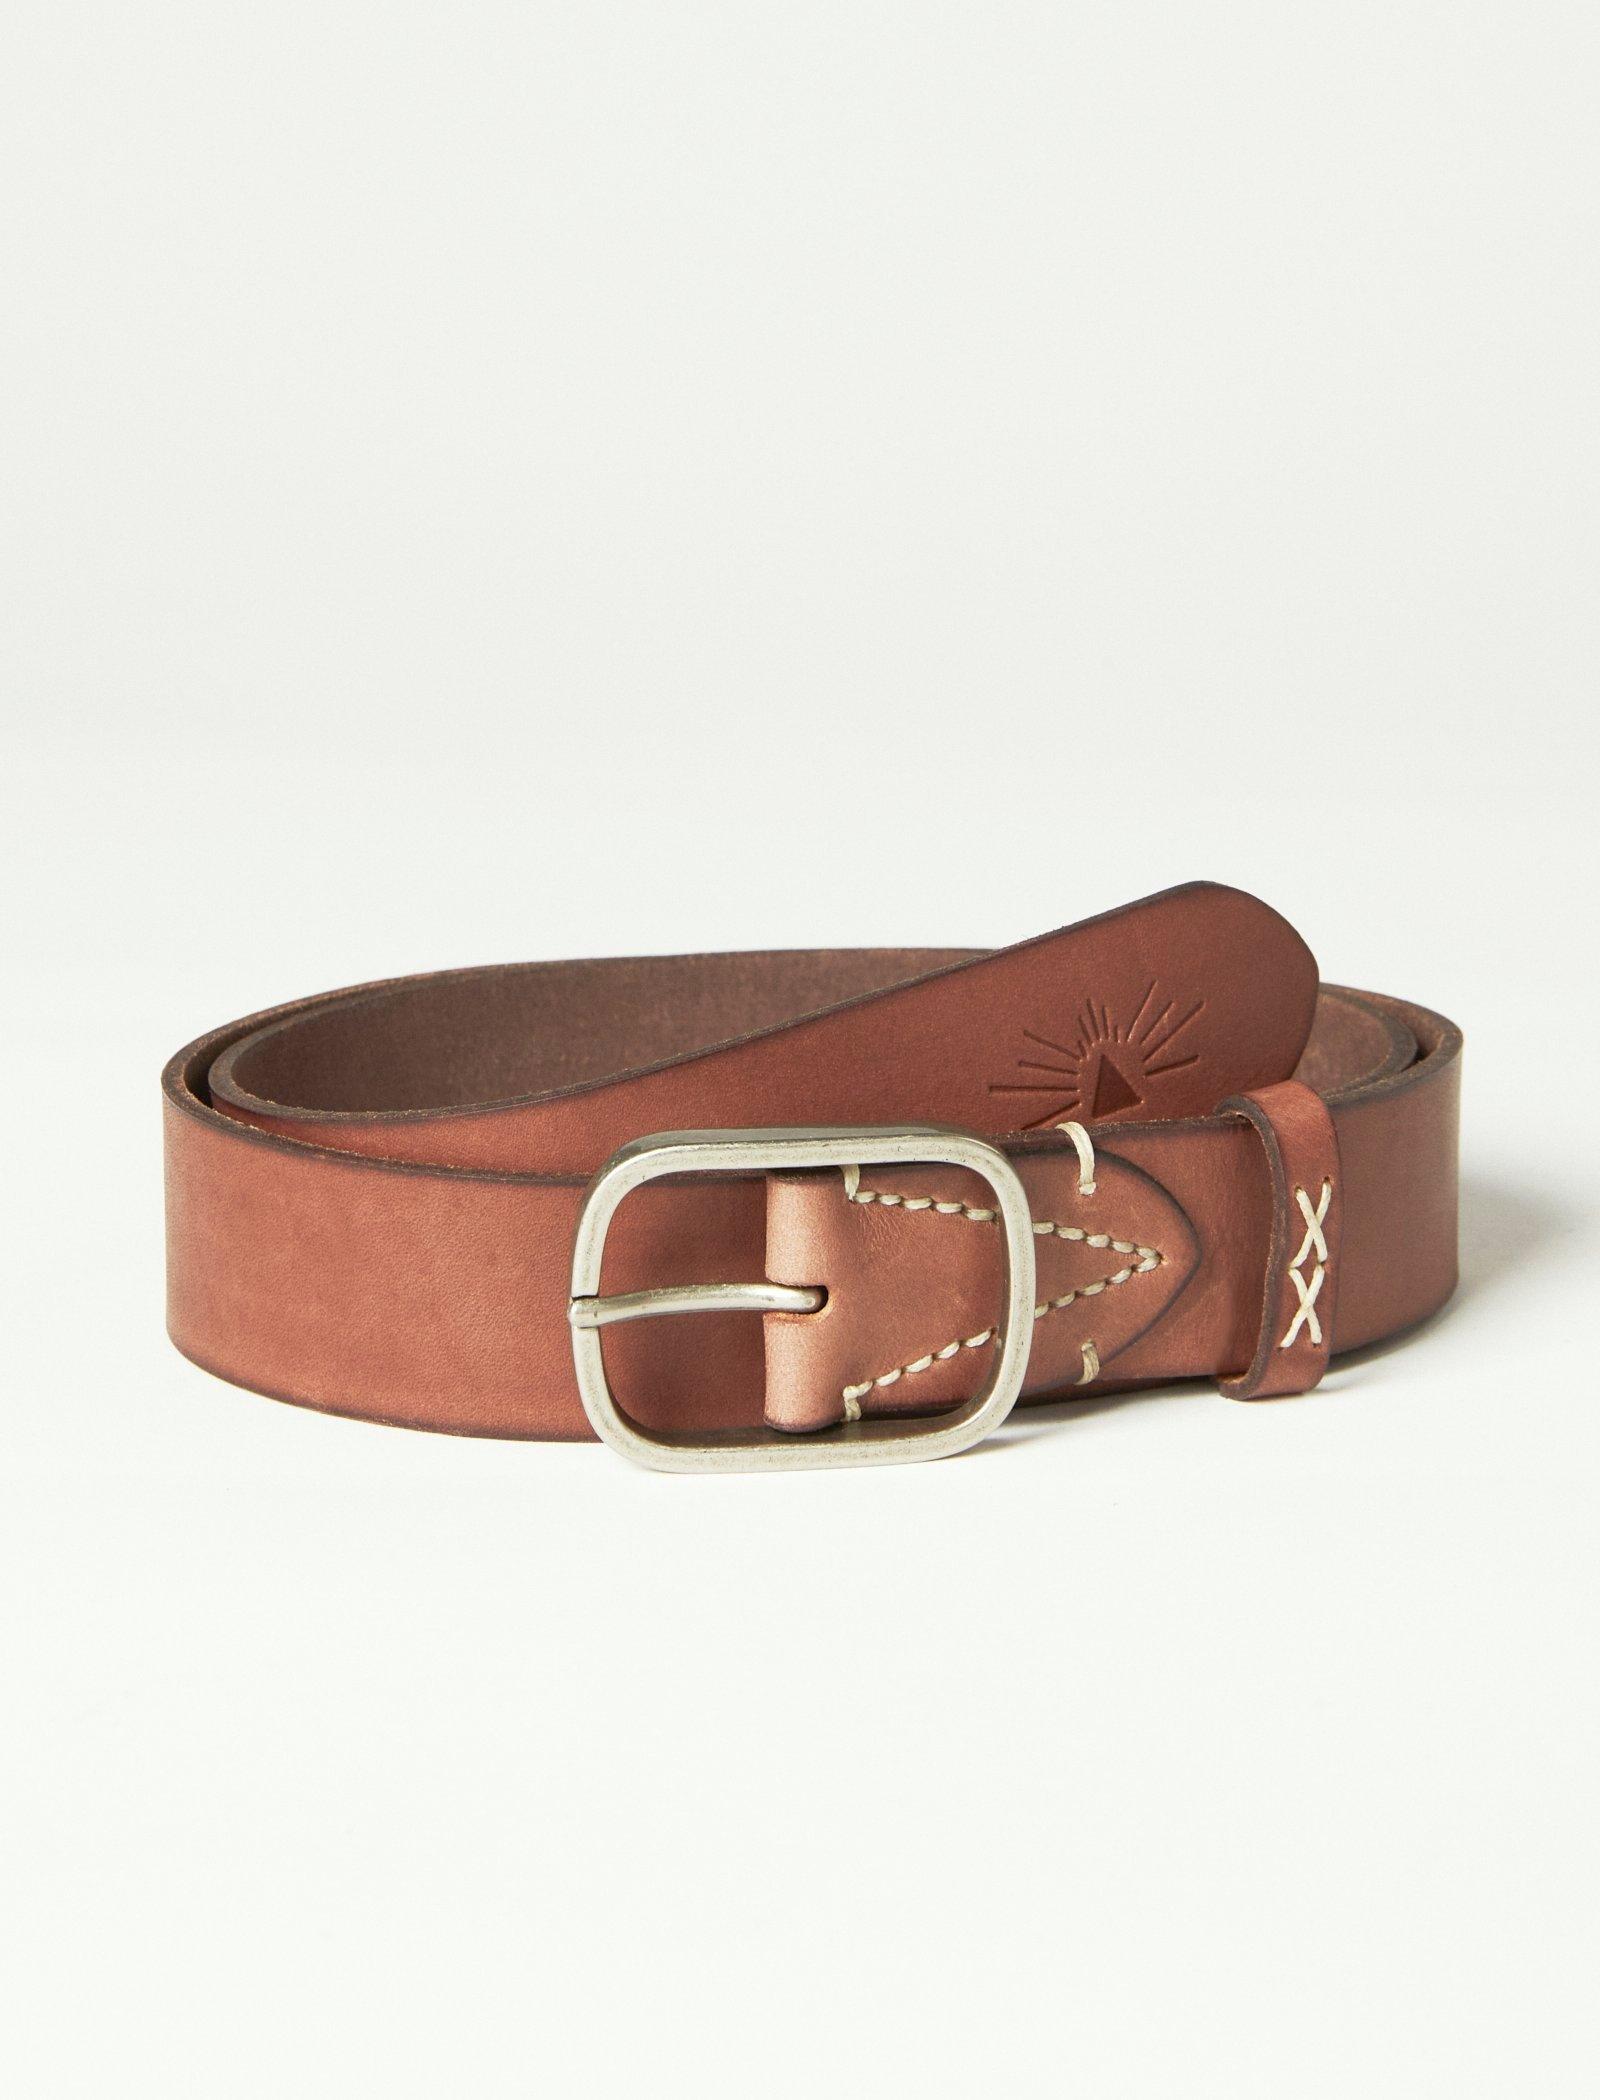 Lucky Brand Men's Embroidery Belt Brown